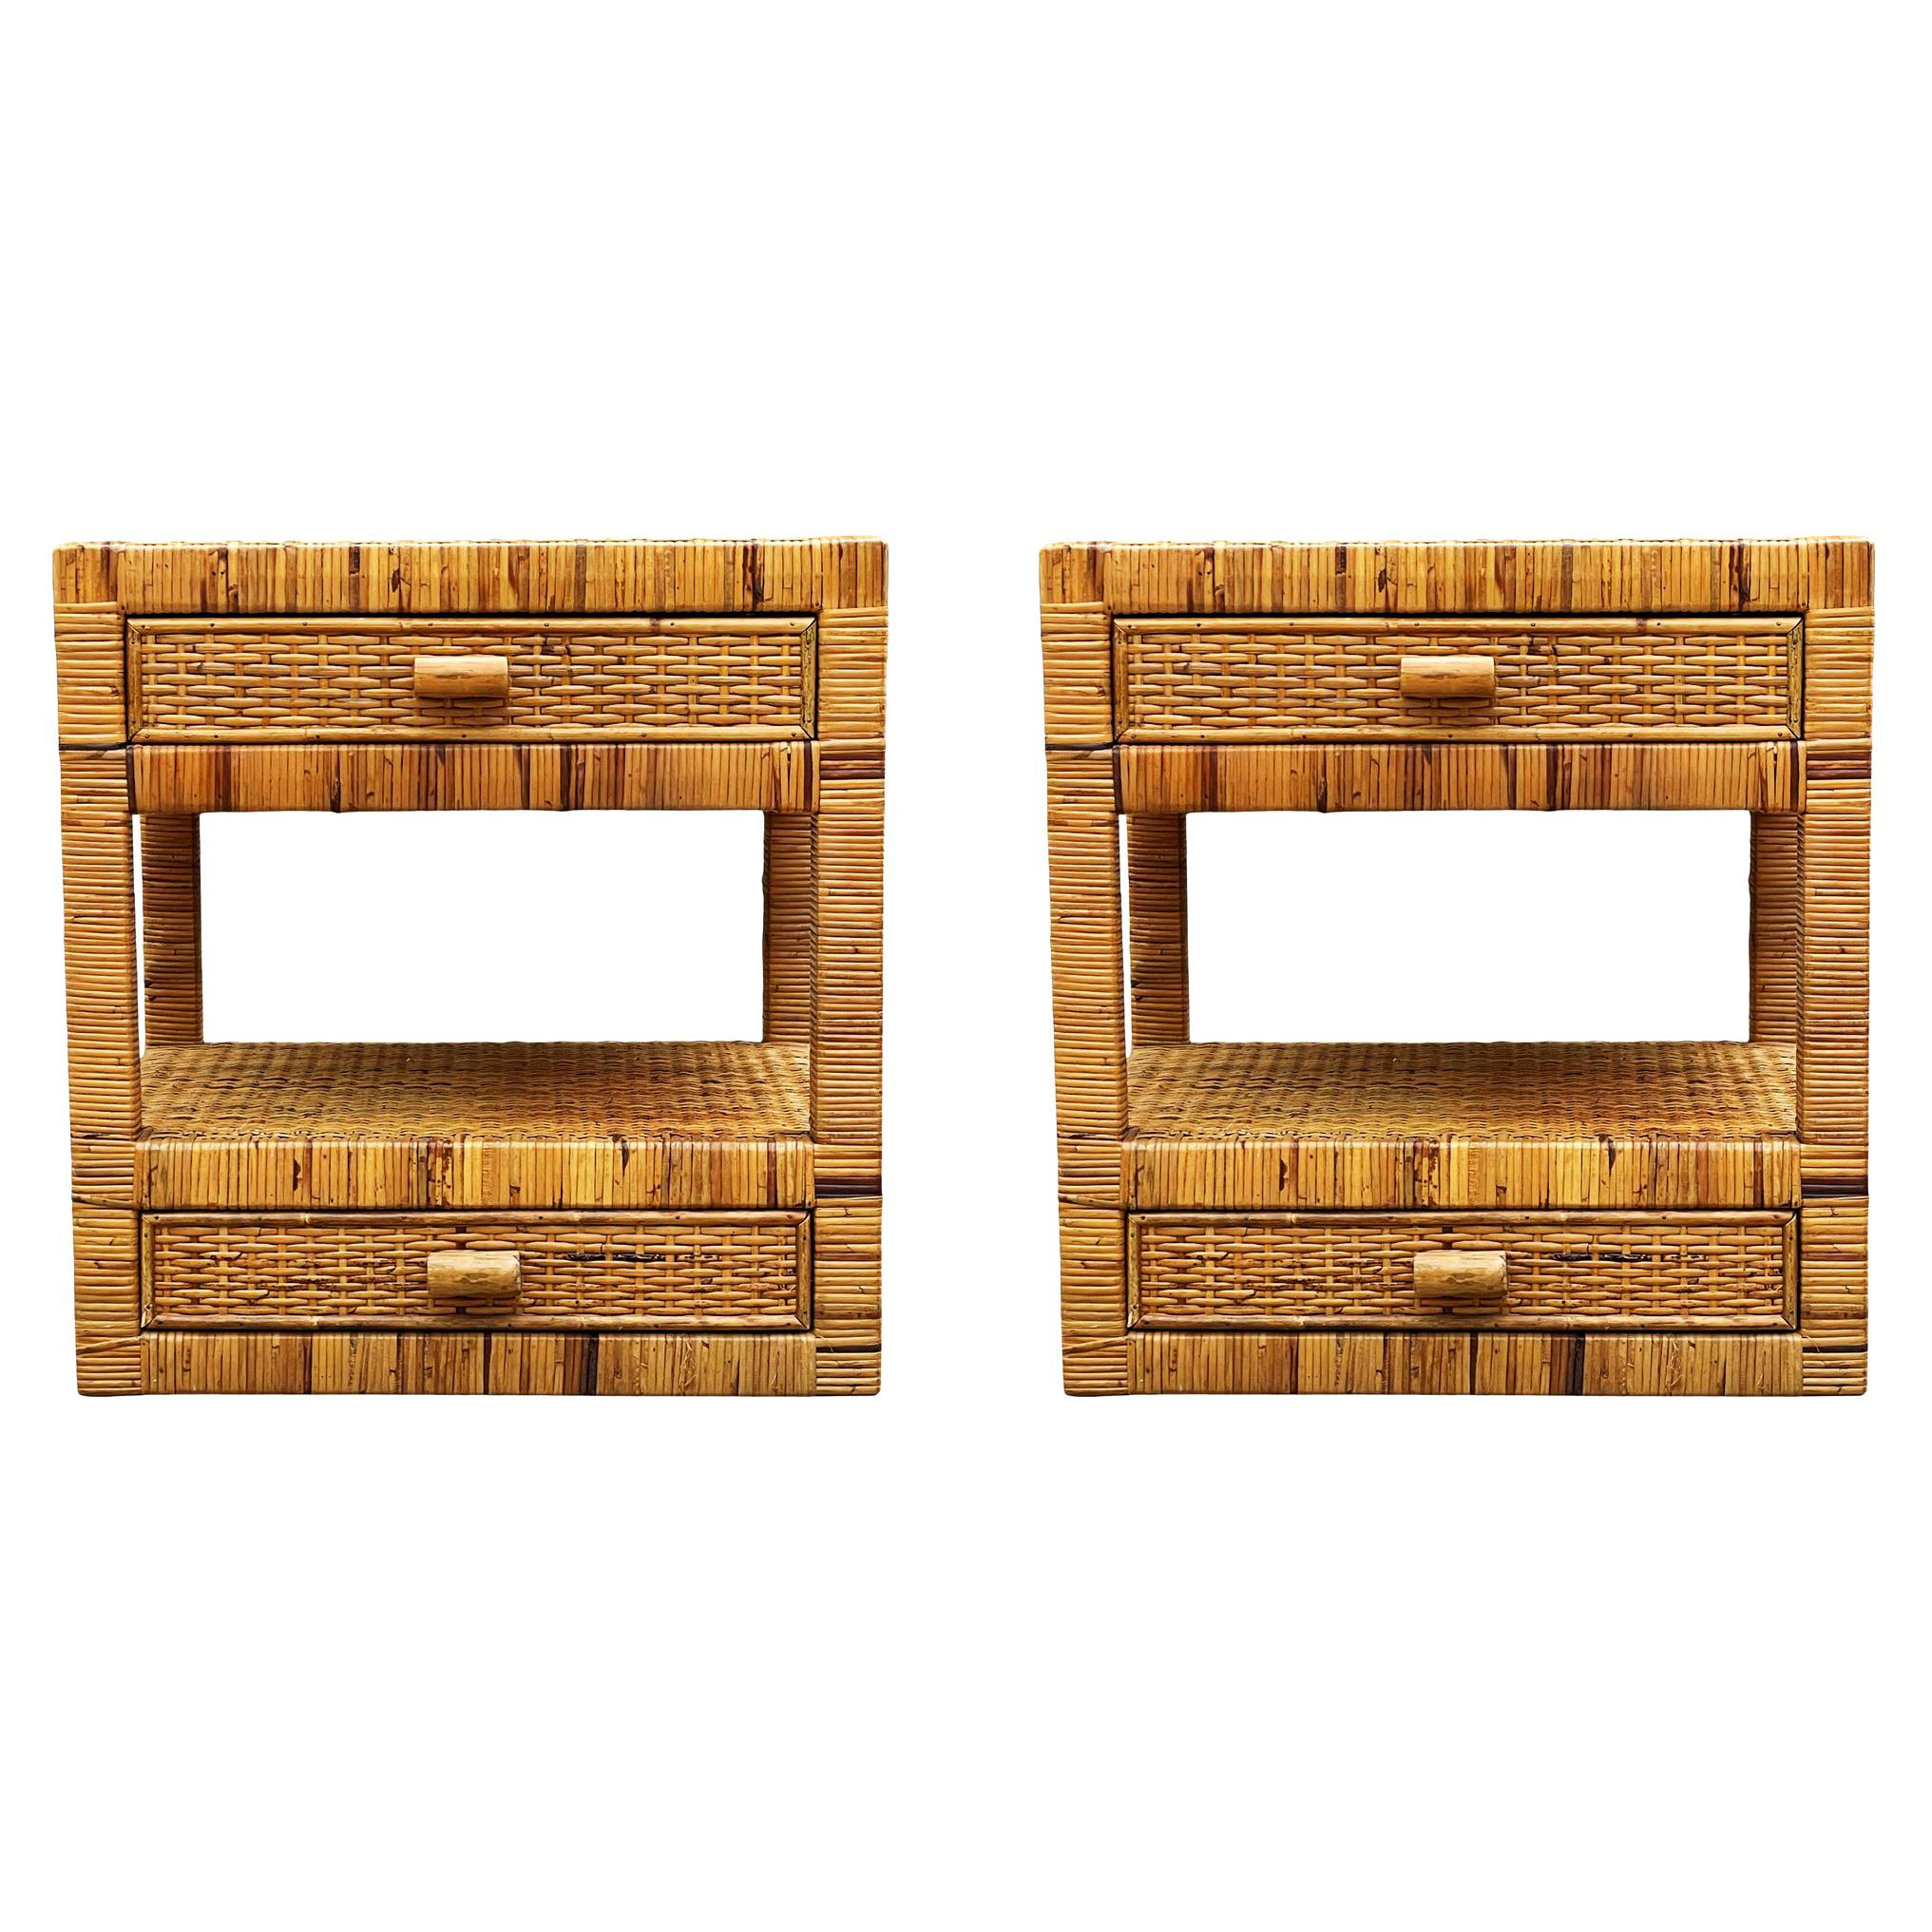 Pair of Mid-Century Modern Wicker or Rattan Woven Night Stands or End Tables